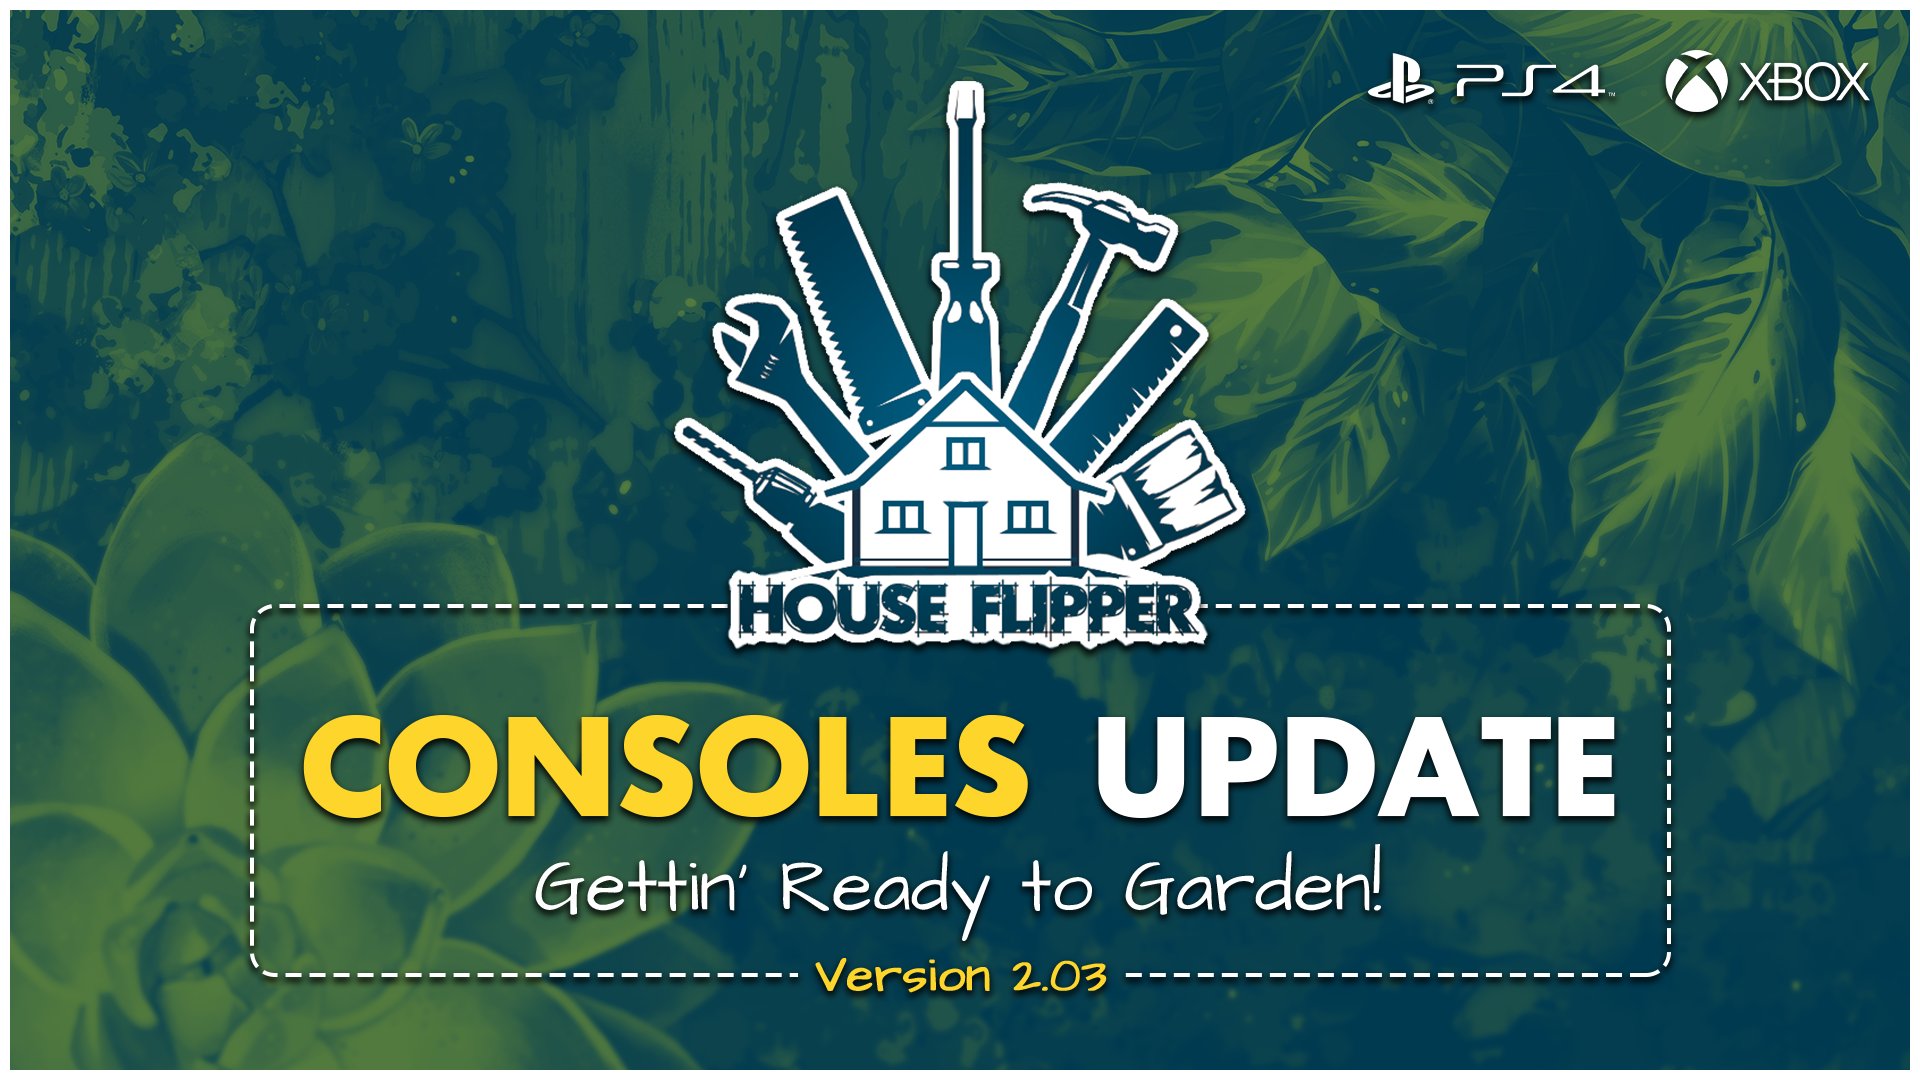 House Flipper on Twitter: "As we are moving forward Garden for consoles - we just released a pre-garden patch to optimize the game and get ready to launch the DLC.